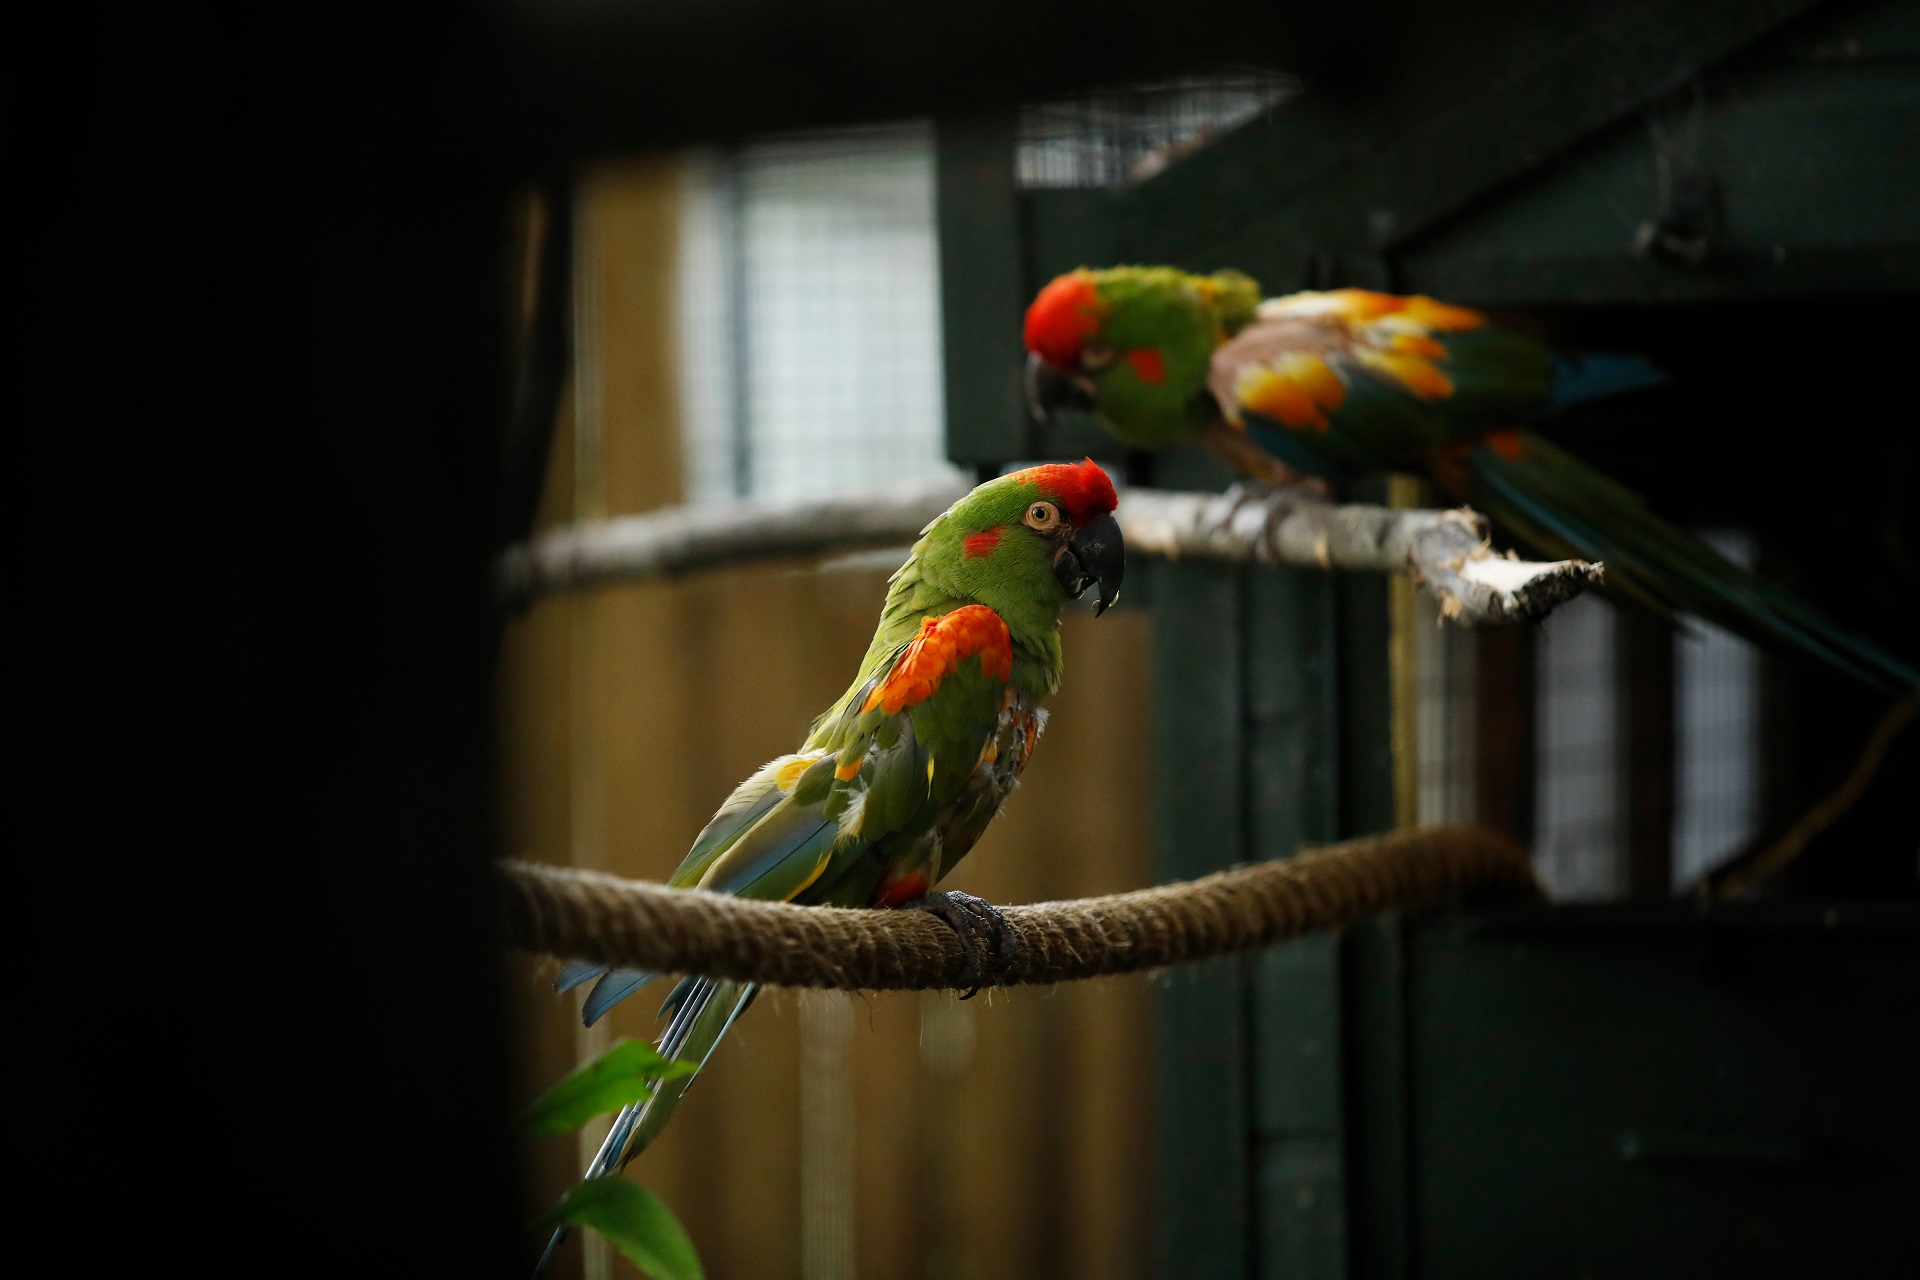 Red fronted macaws sitting on rope Image: Sian Adison 2019